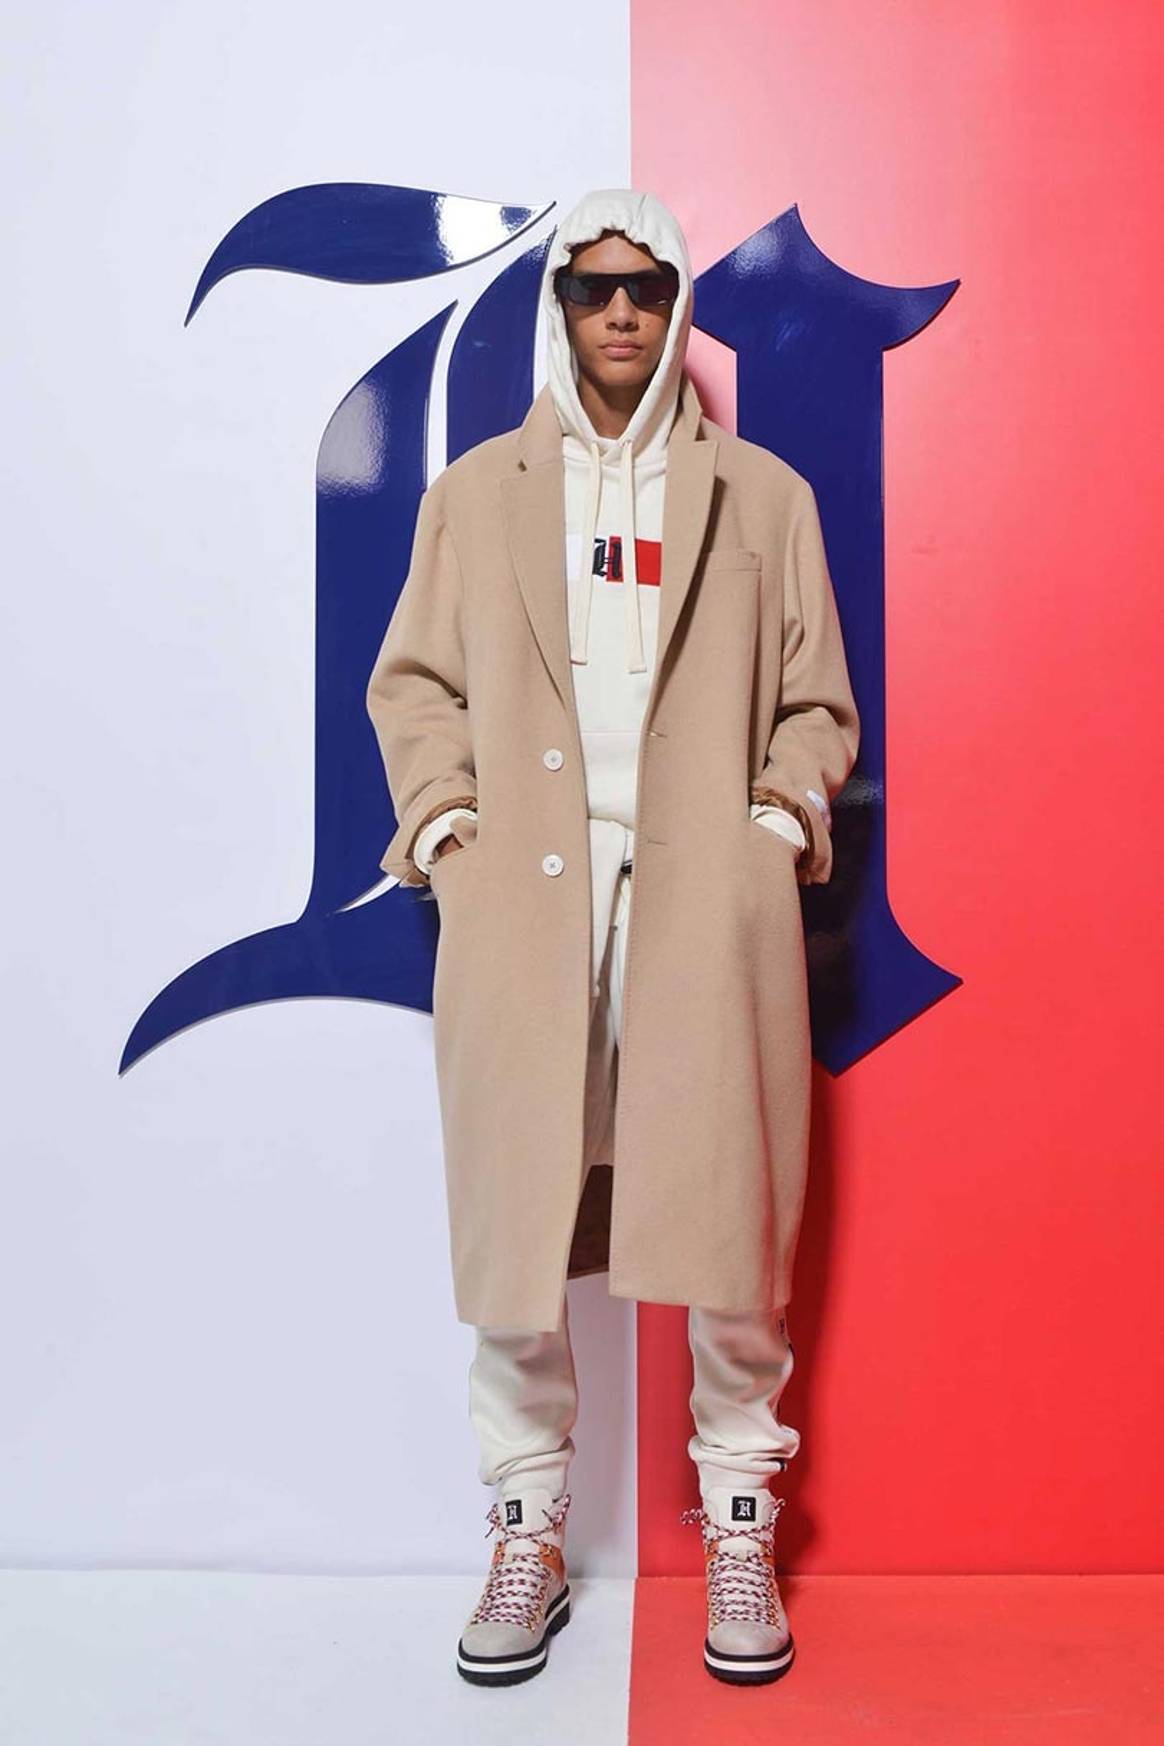 Tommy Hilfiger and Lewis Hamilton present Fall 2019 TOMMYXLEWIS collaborative collection in Milan